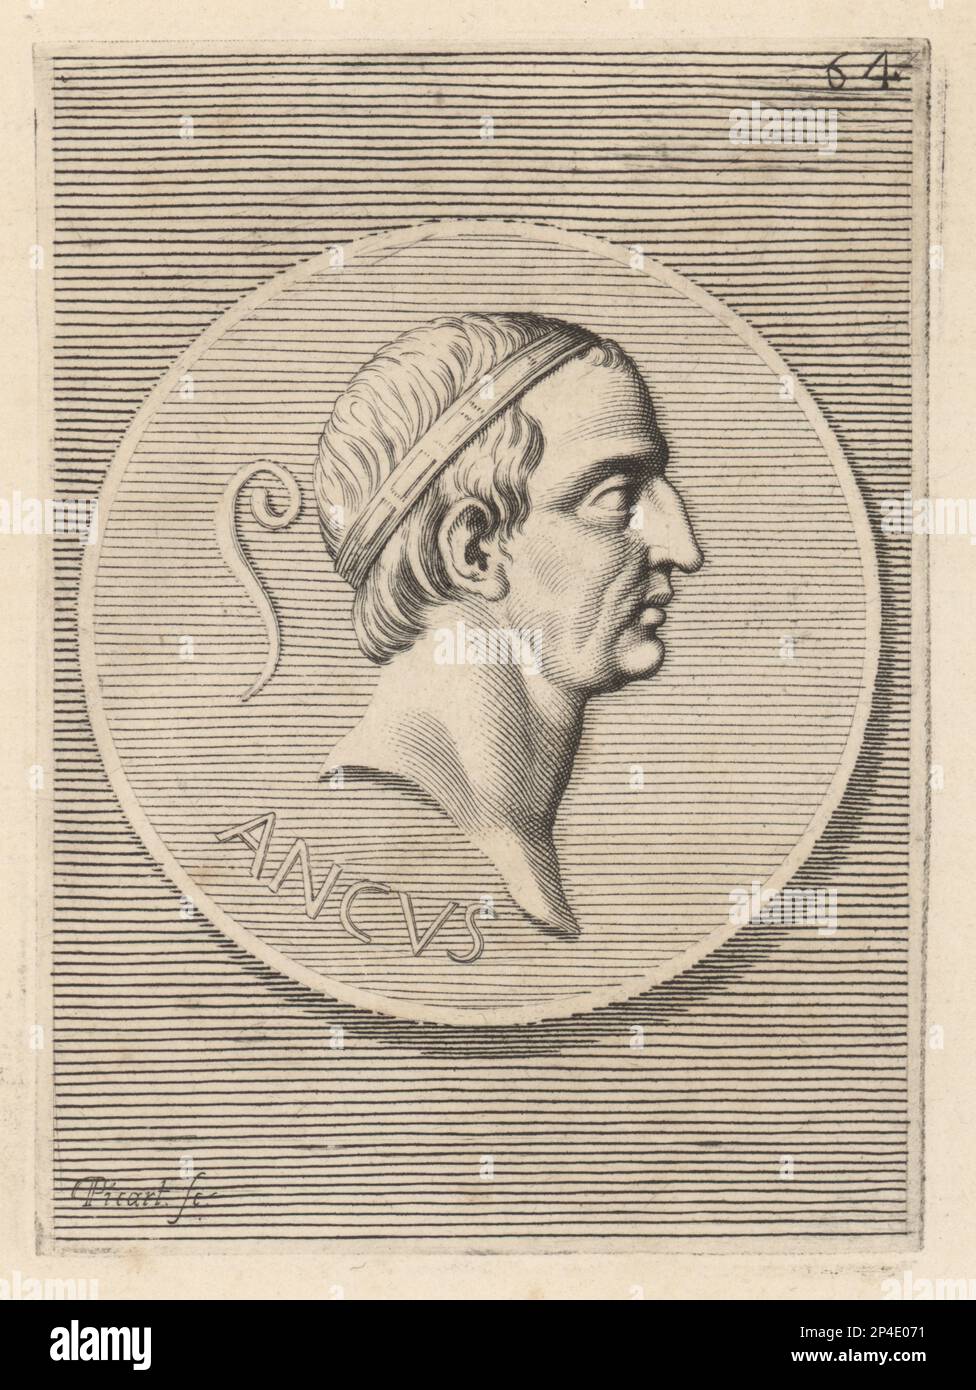 Ancus Martius, legendary fourth king of Rome, who reigned for 24 years. Son of Marcius and Pompilia, Numa Pompilius's daughter. Head wearing diadem from a silver denarius coin. Anco Martio IV Re di Roma. Copperplate engraving by Etienne Picart after Giovanni Angelo Canini from Iconografia, cioe disegni d'imagini de famosissimi monarchi, regi, filososi, poeti ed oratori dell' Antichita, Drawings of images of famous monarchs, kings, philosophers, poets and orators of Antiquity, Ignatio de’Lazari, Rome, 1699. Stock Photo